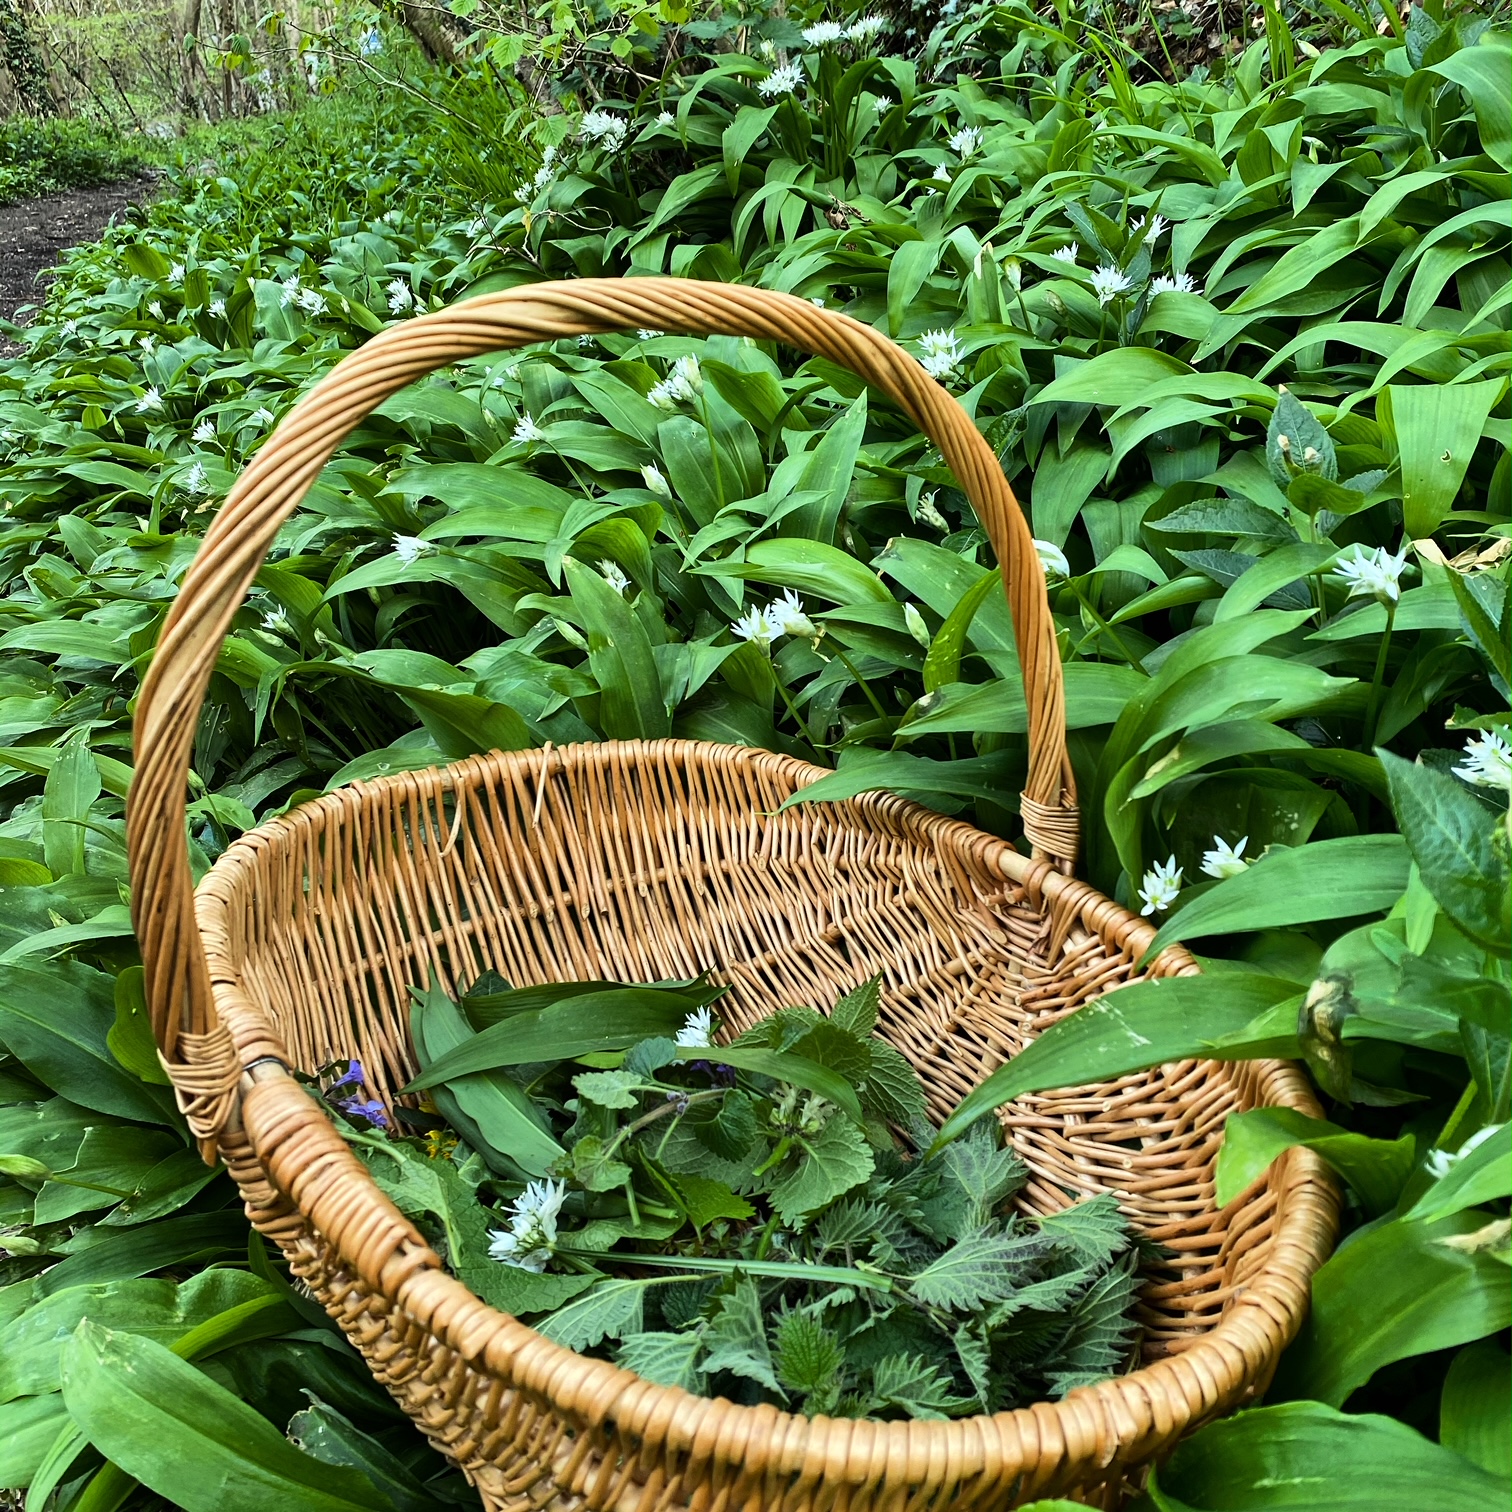 Foraging confessions - wild garlic is not for me